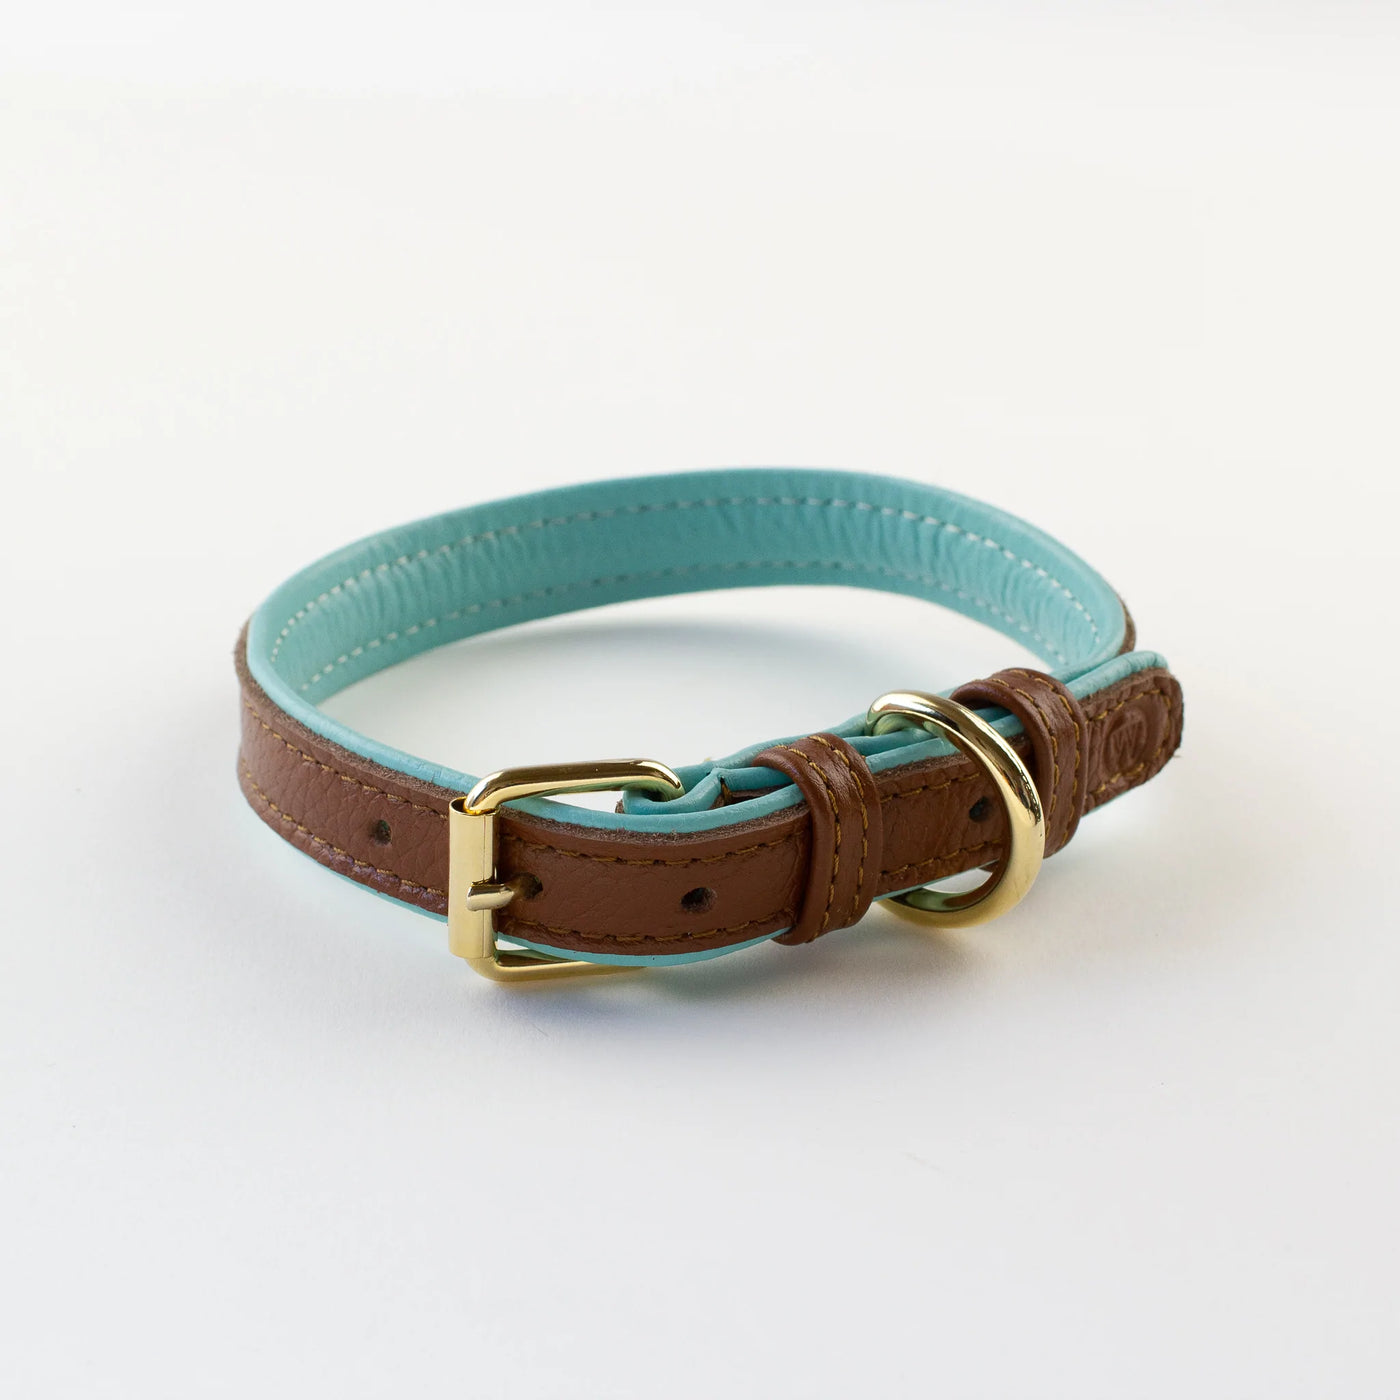 Two Tone Leather Collar In Aqua And Brown